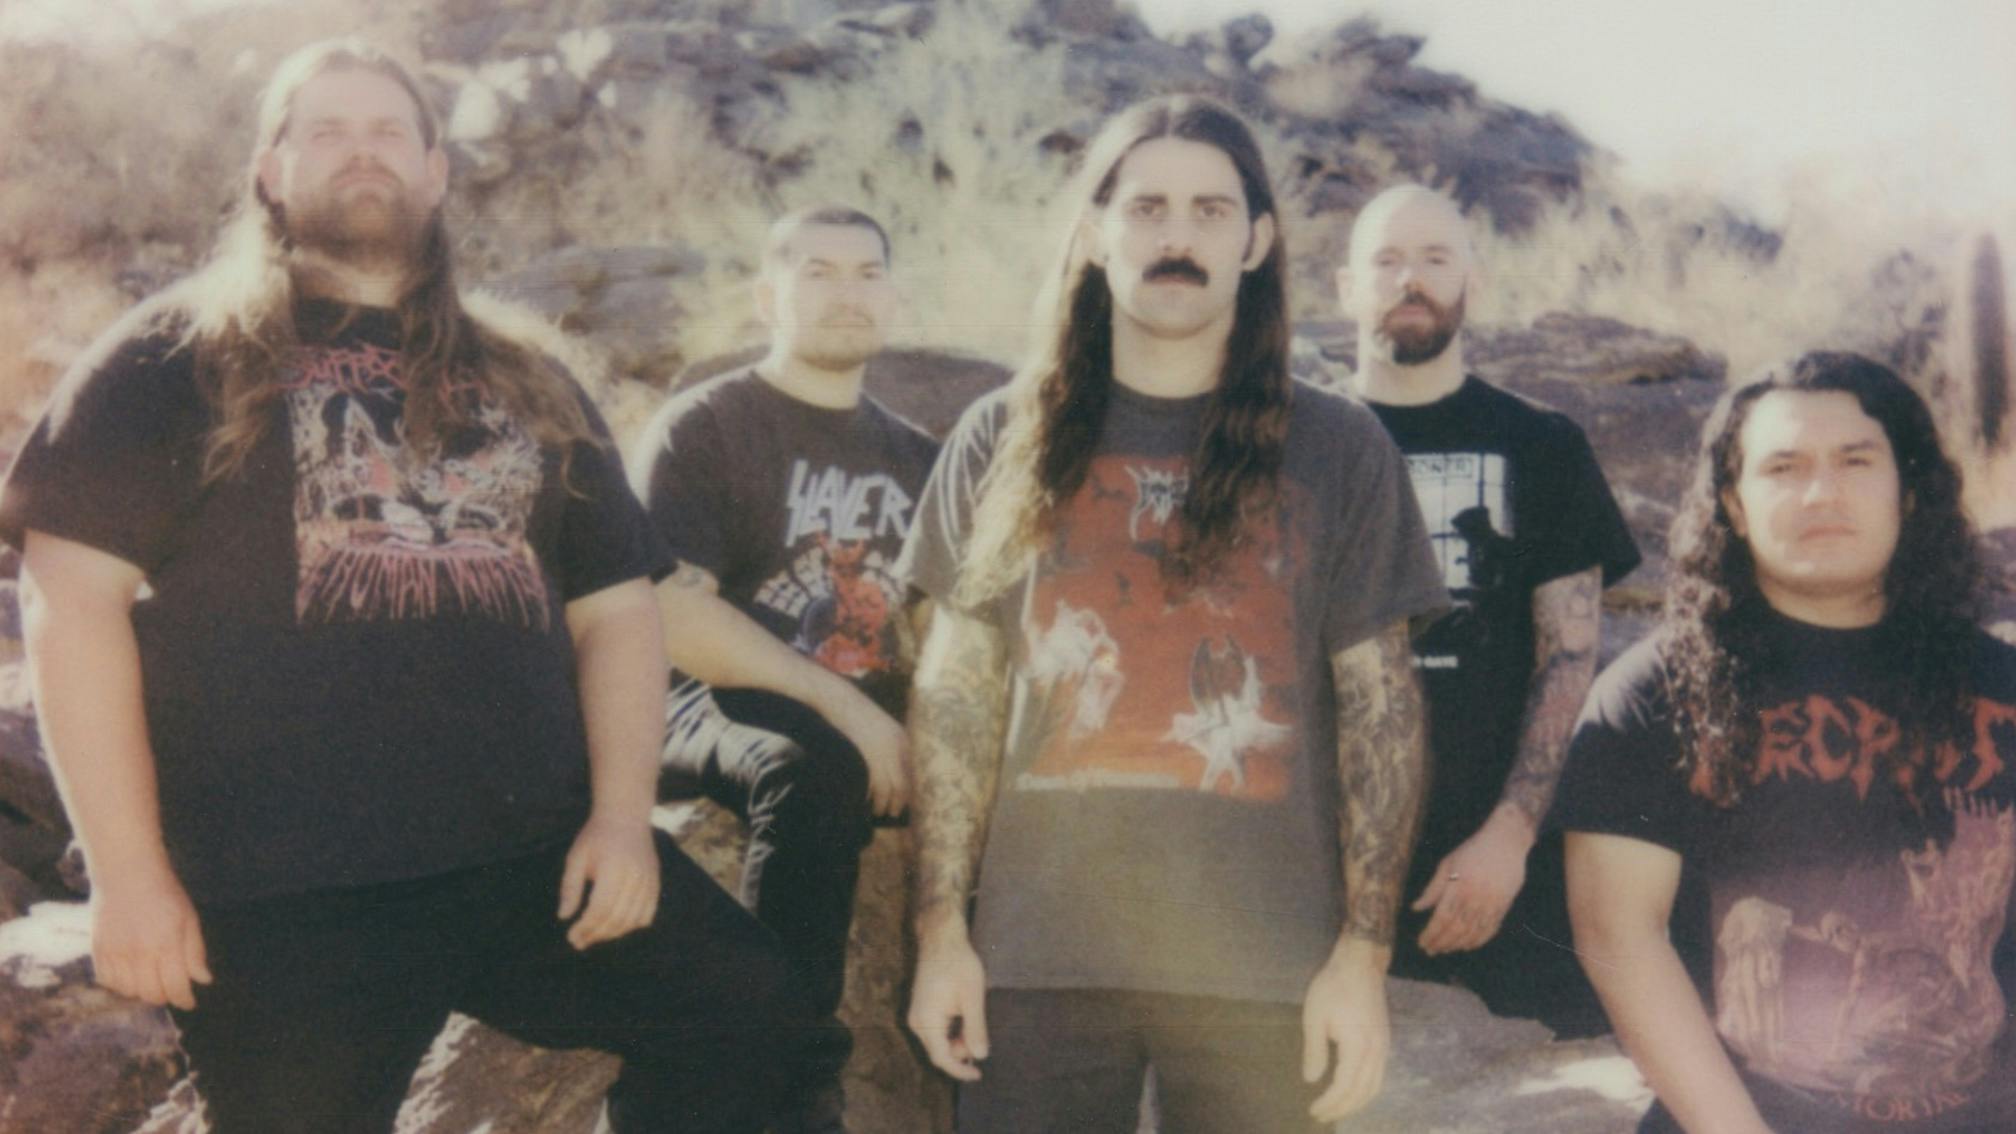 Gatecreeper just surprise-released their new album, An Unexpected Reality